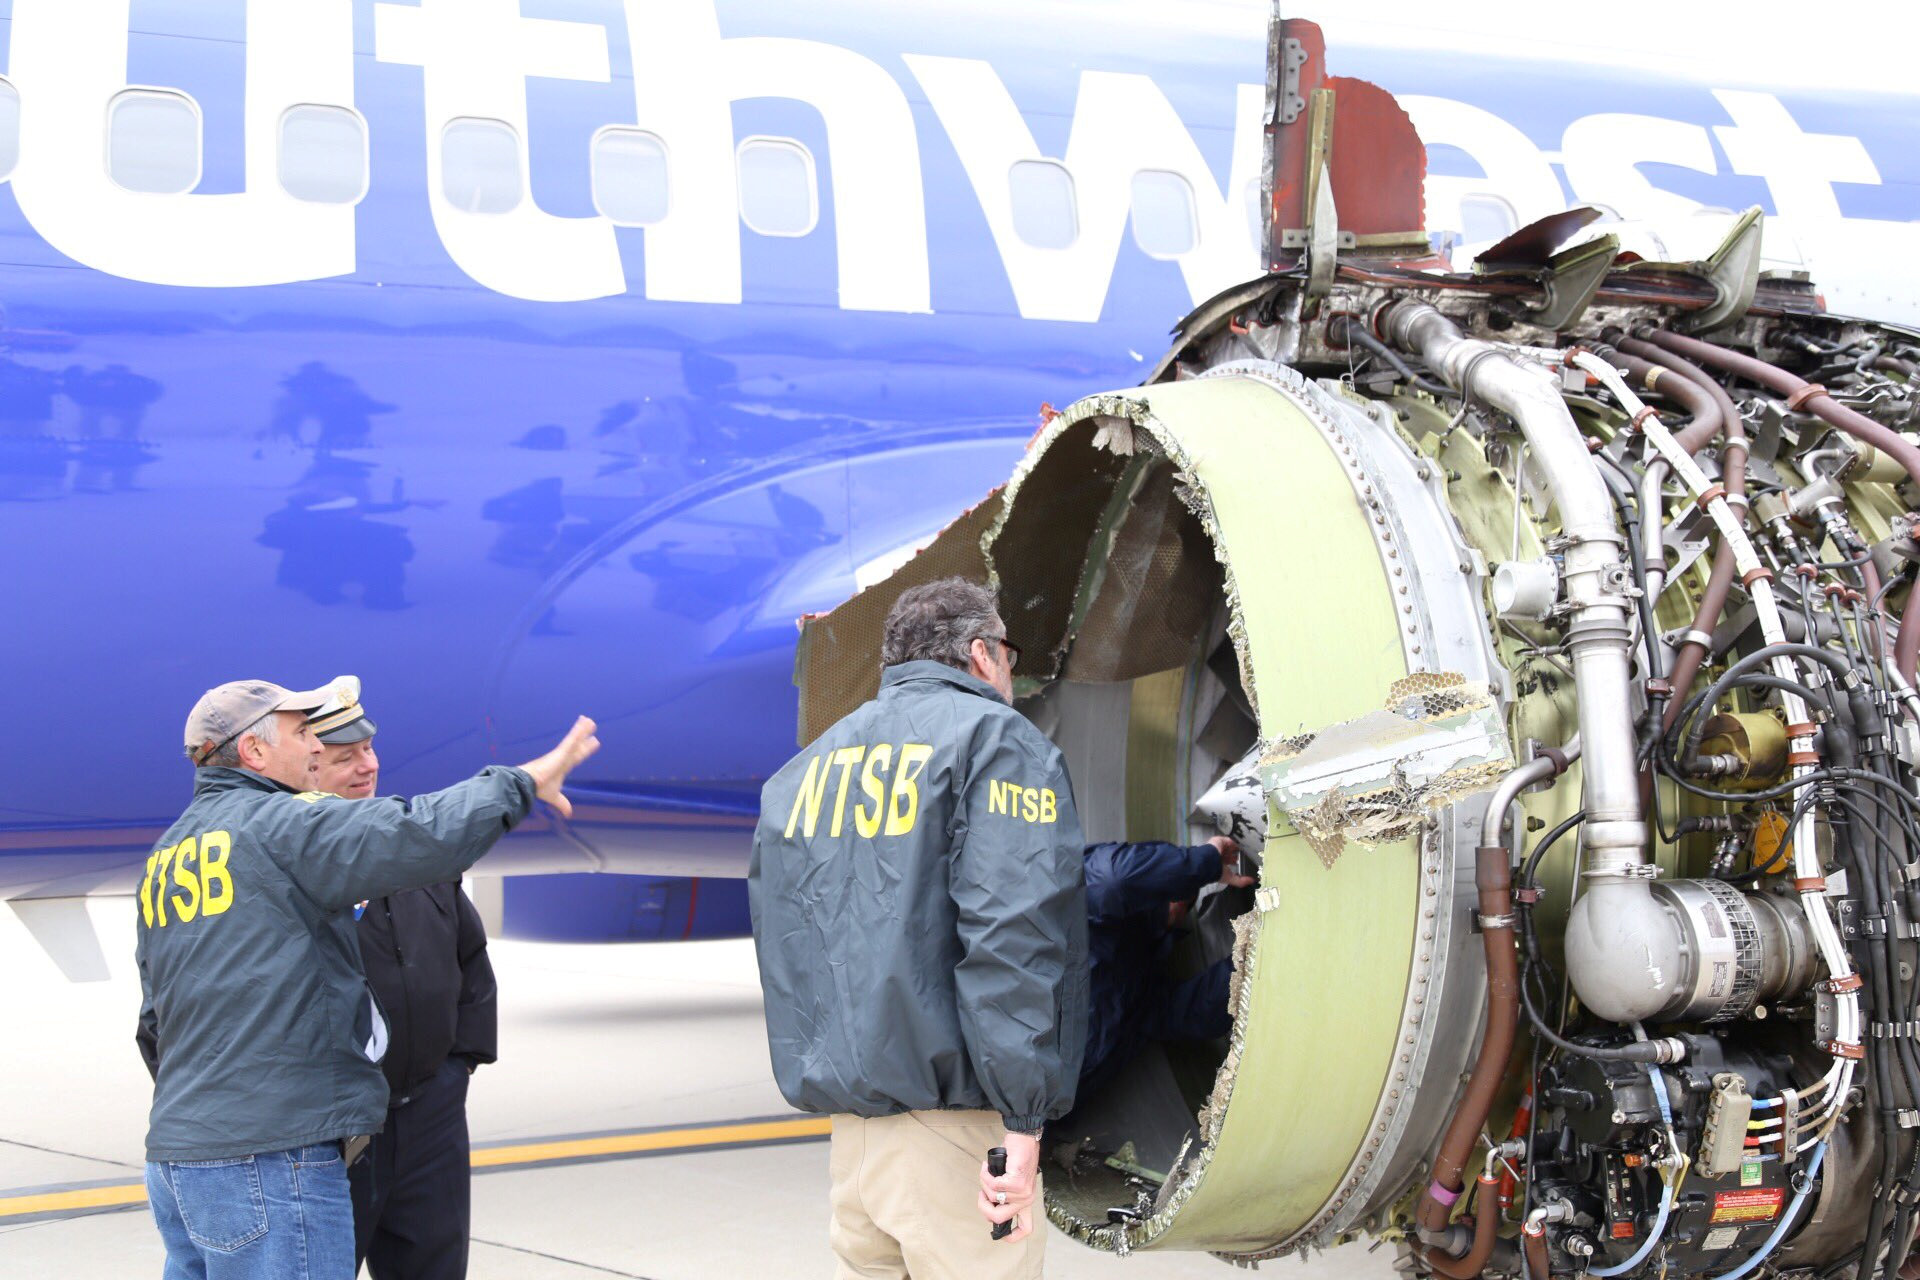 NTSB investigators examine damage to the engine of the Southwest Airlines plane after it safely...